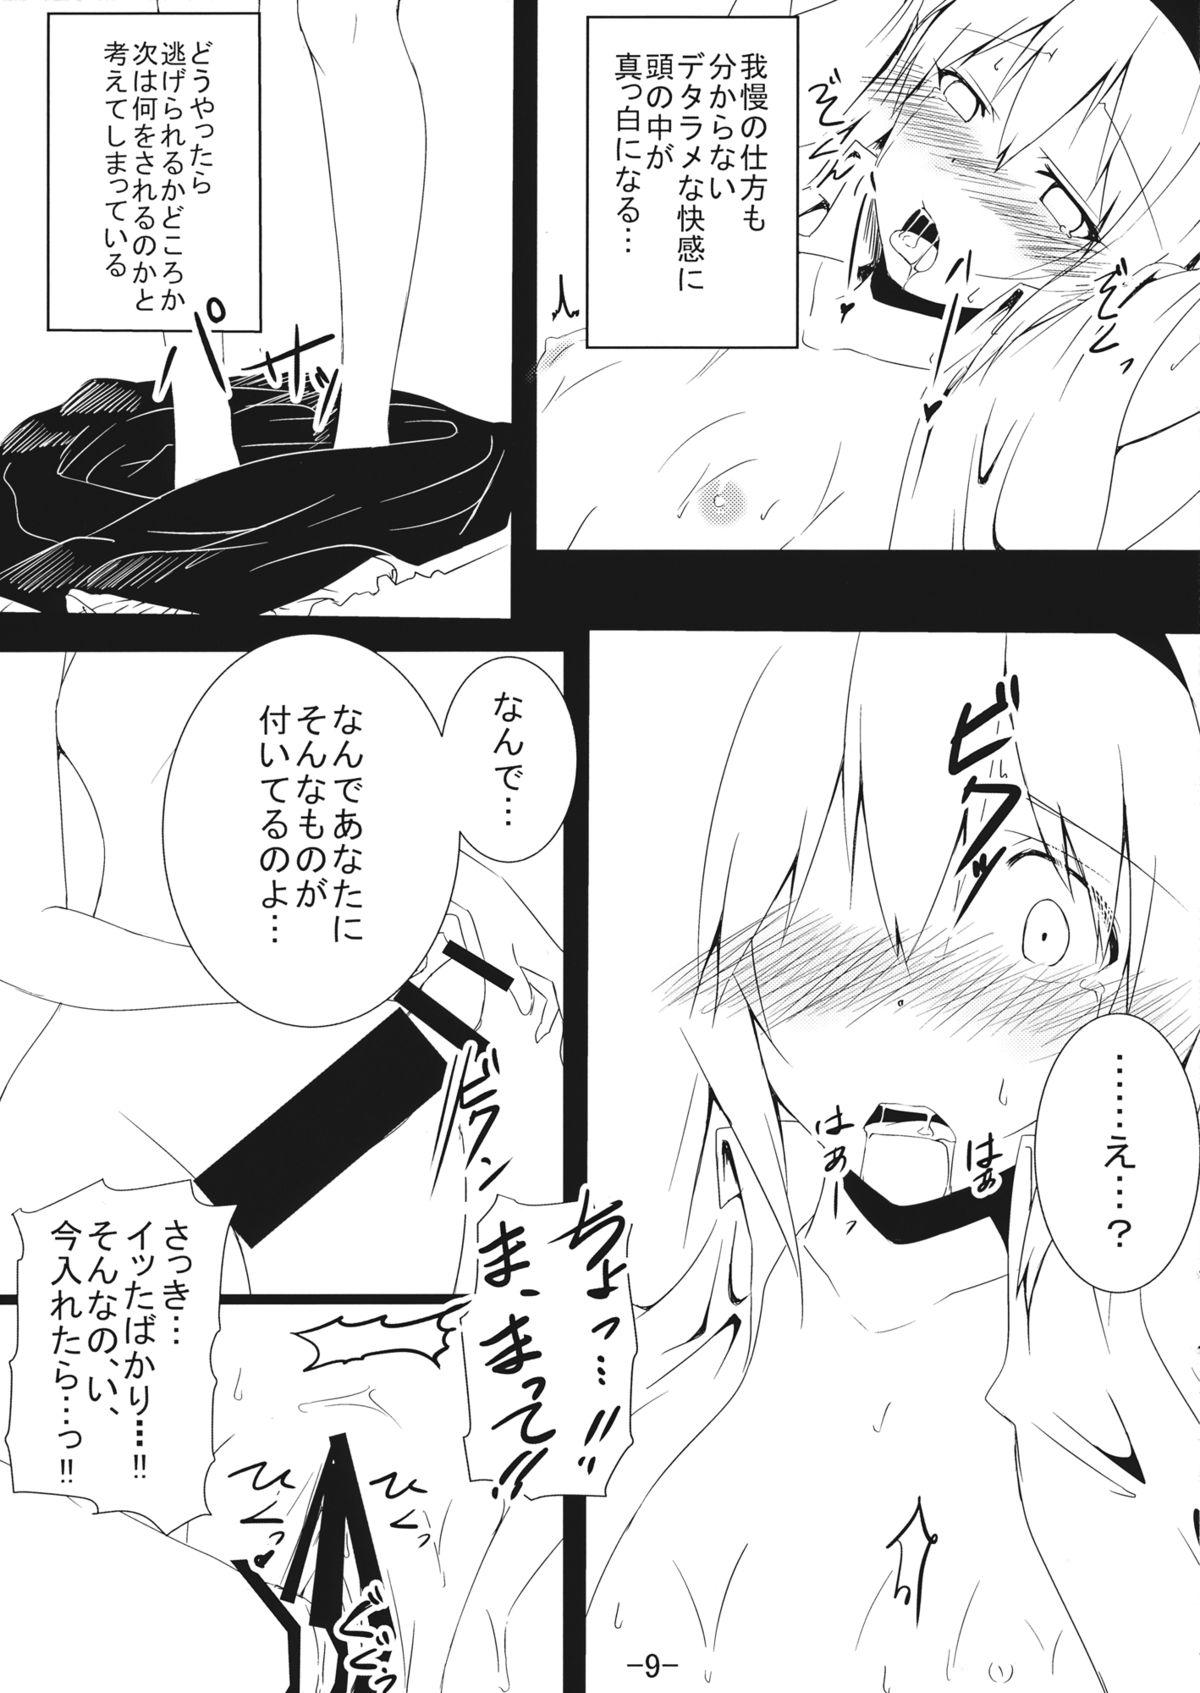 Pene Alice in Nightmare - Touhou project Creampies - Page 8